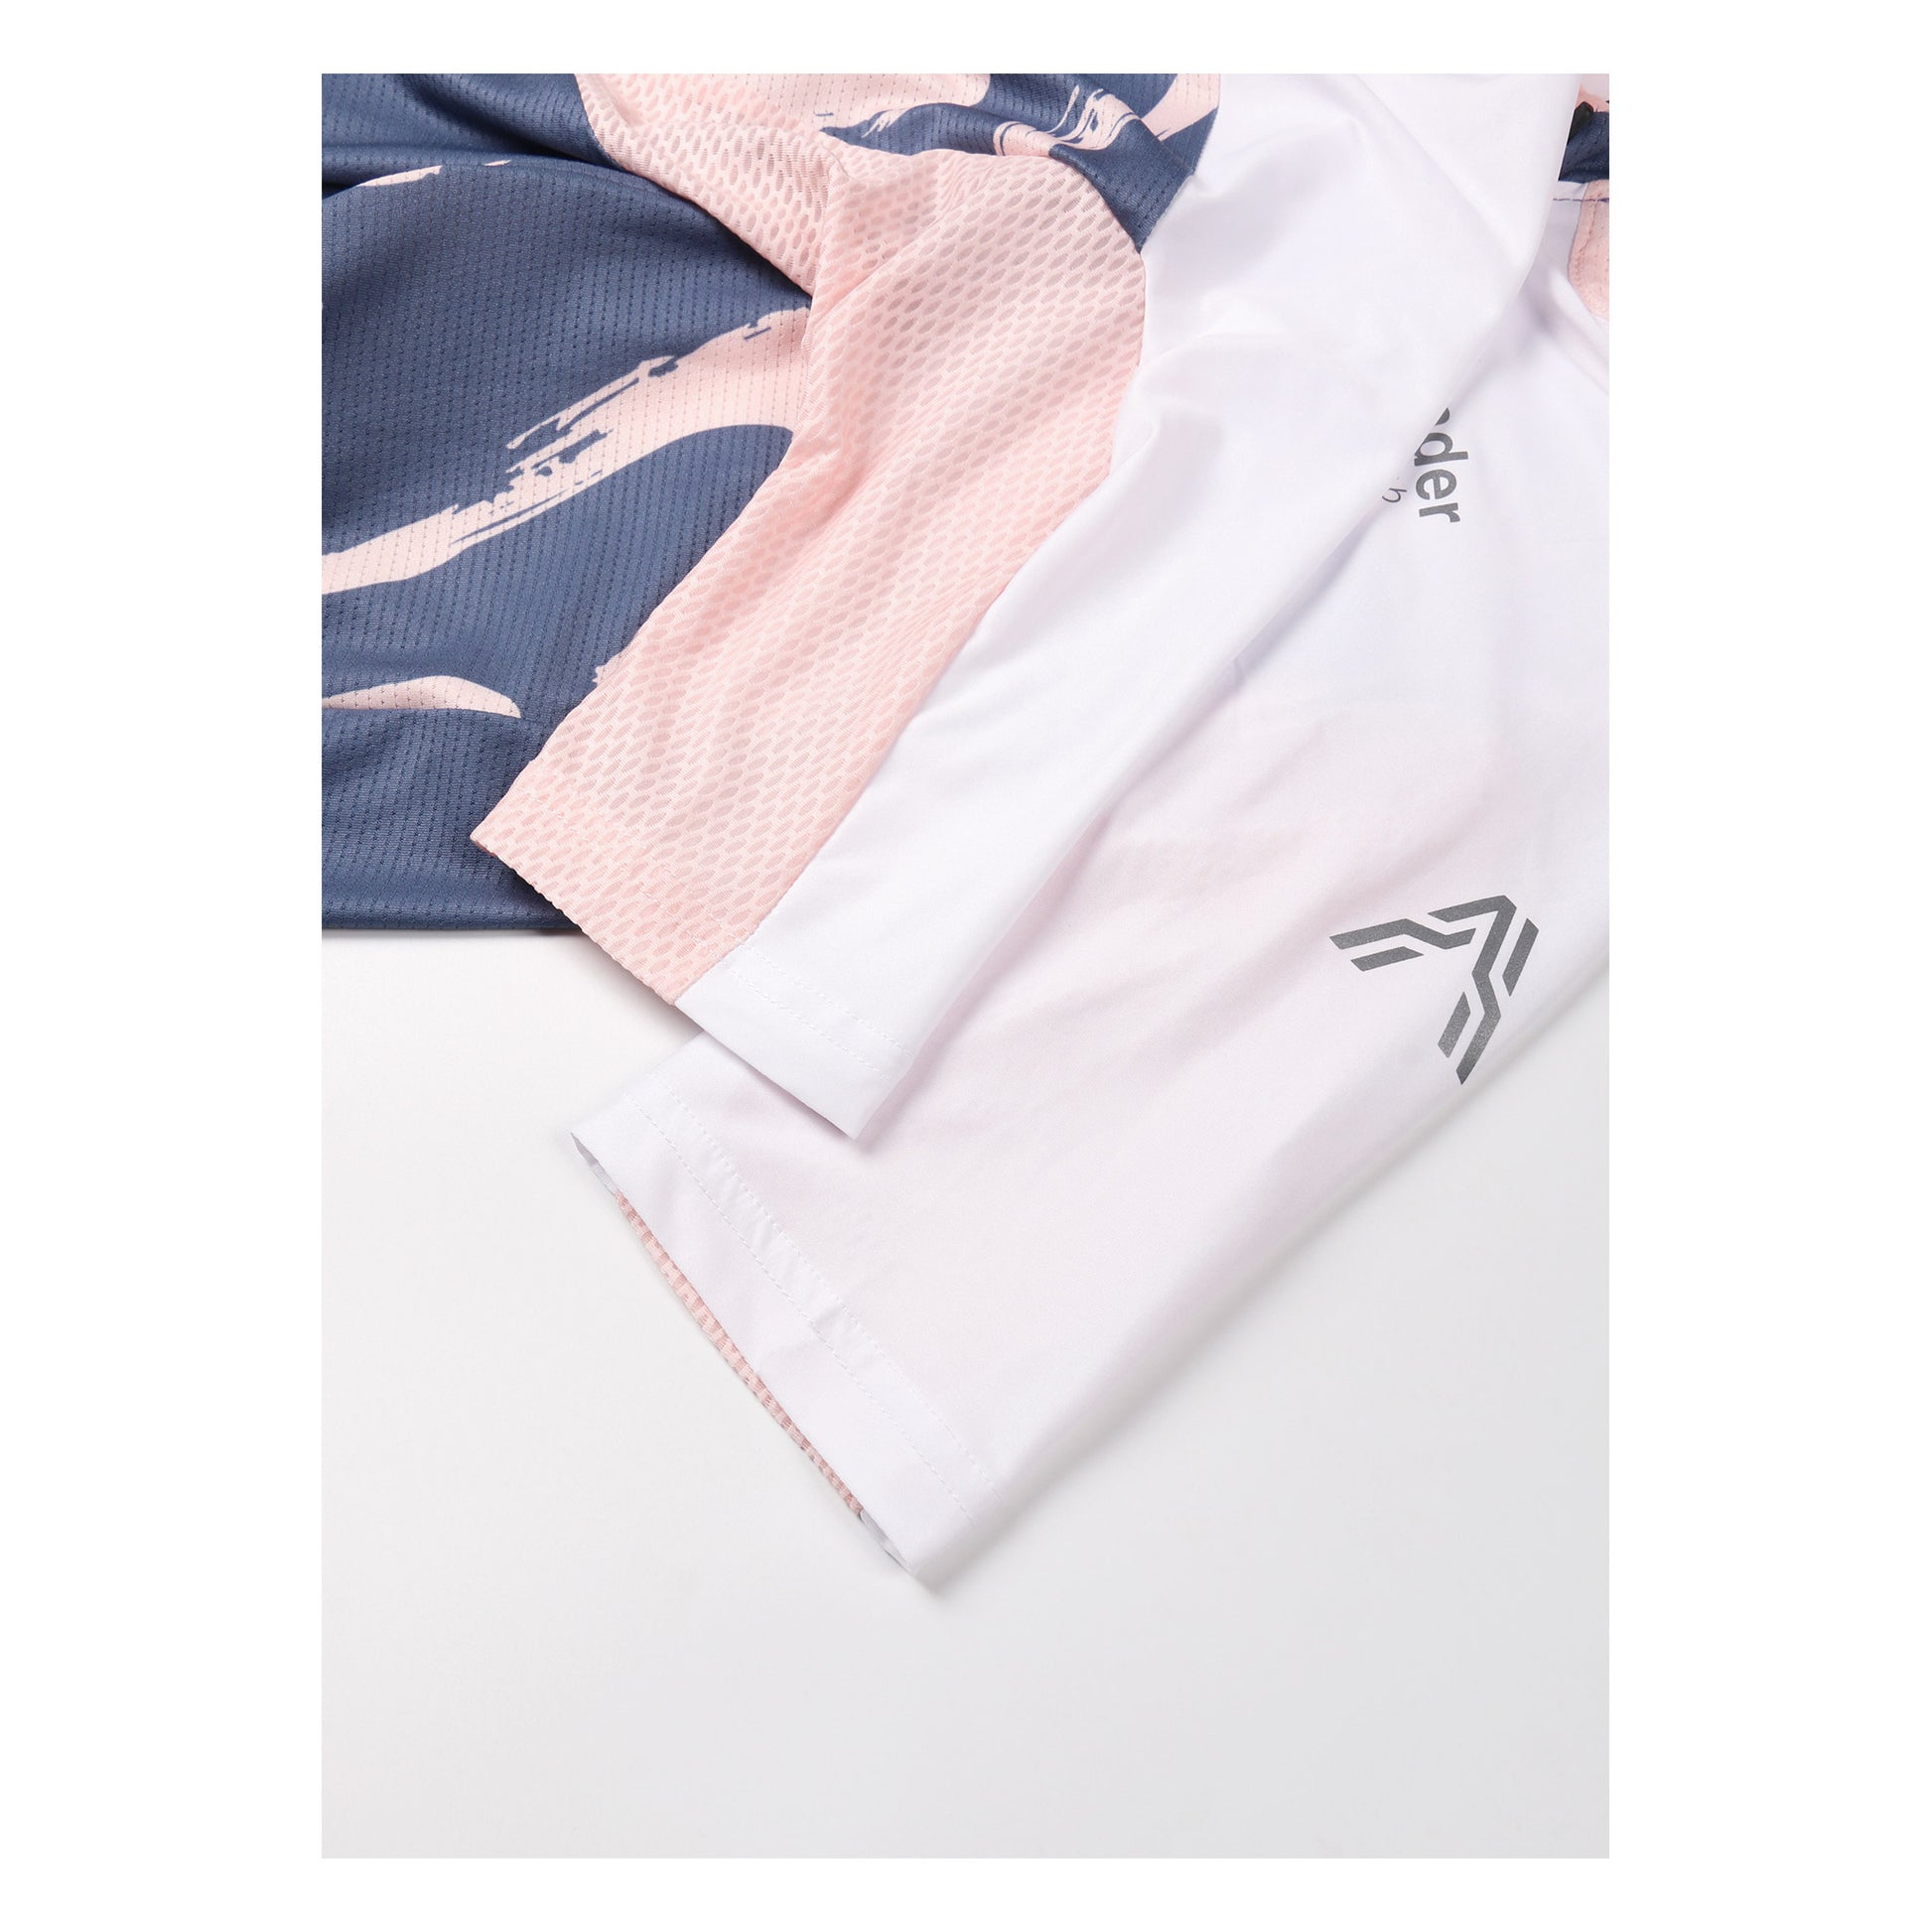 Yukimi Short Sleeve Jersey for Women by Ascender Cycling Club in Zürich Switzerland Picture Sleeves with Mesh Panel for Better Airflow and Reflective Logo